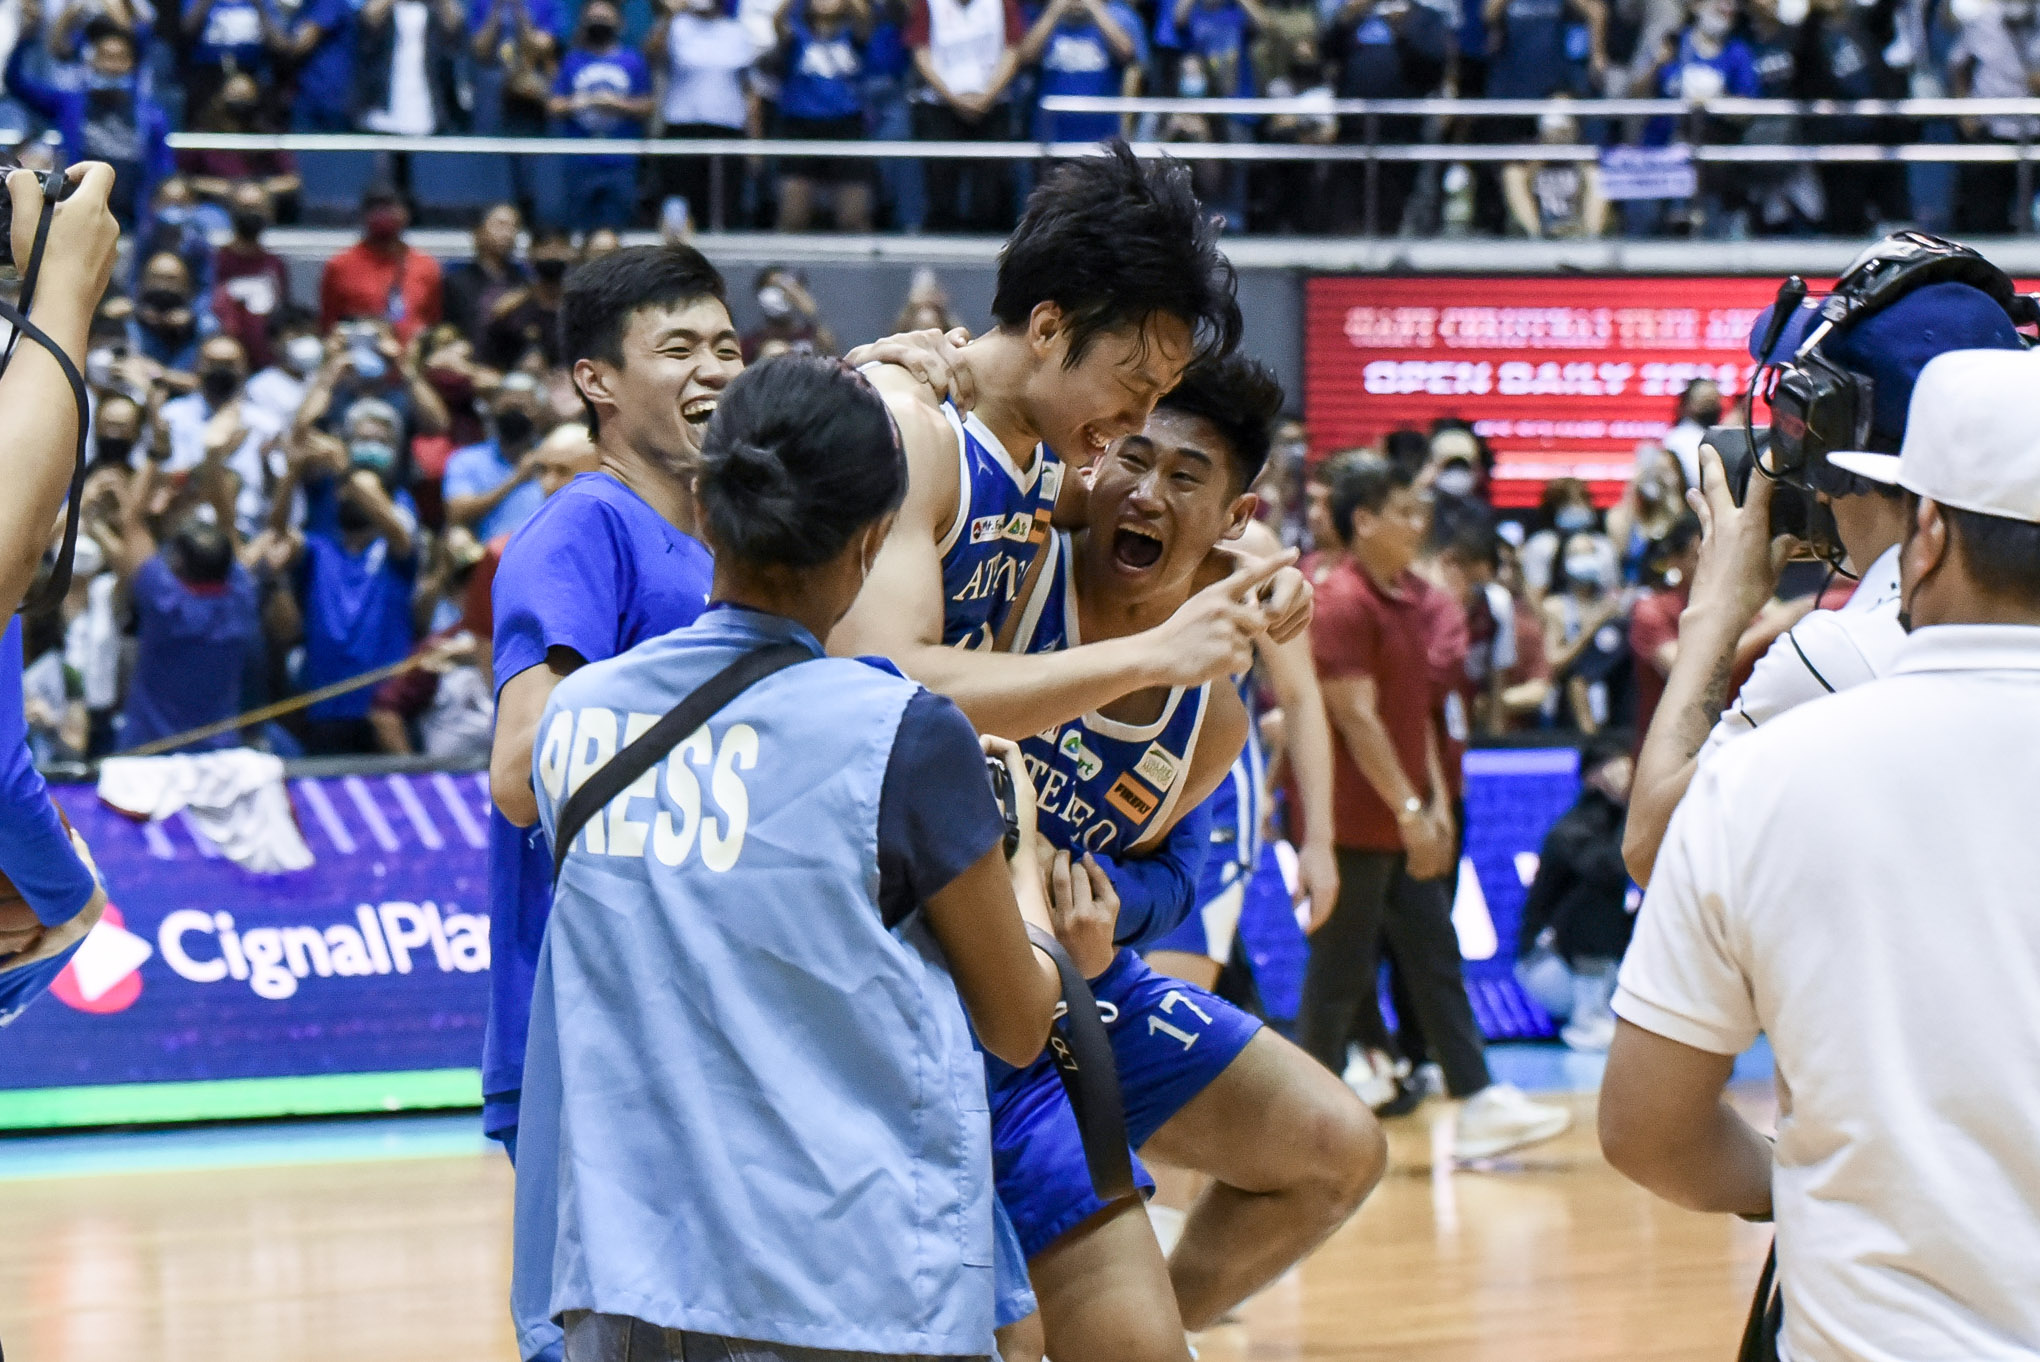 UAAP85-MBB-ILDEFONSO-ANDRADE Dave Ildefonso glad he made the right decision to come back home to Ateneo ADMU Basketball News UAAP  - philippine sports news